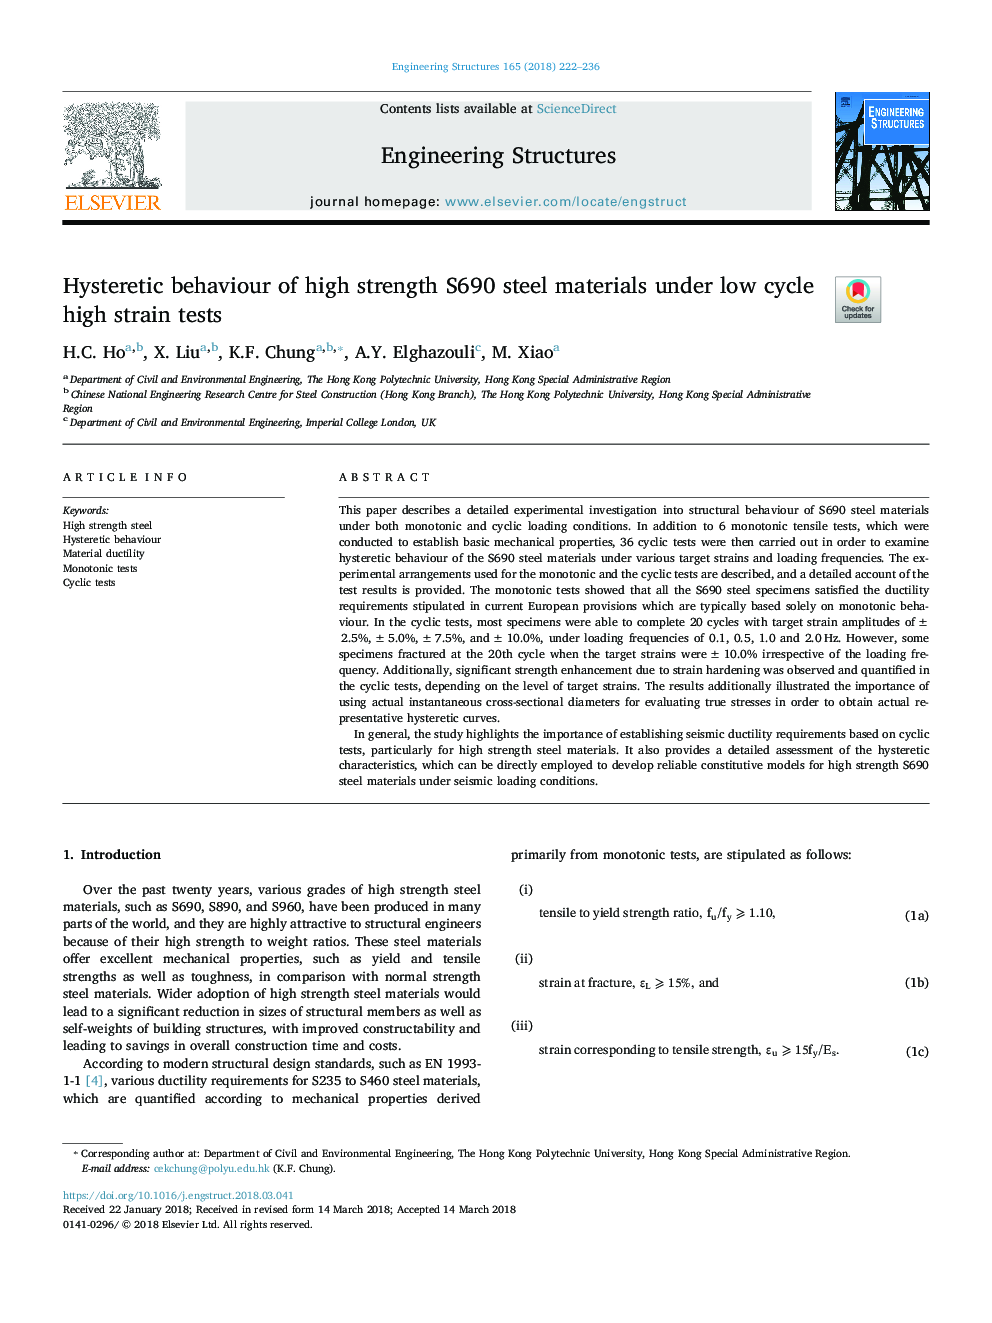 Hysteretic behaviour of high strength S690 steel materials under low cycle high strain tests